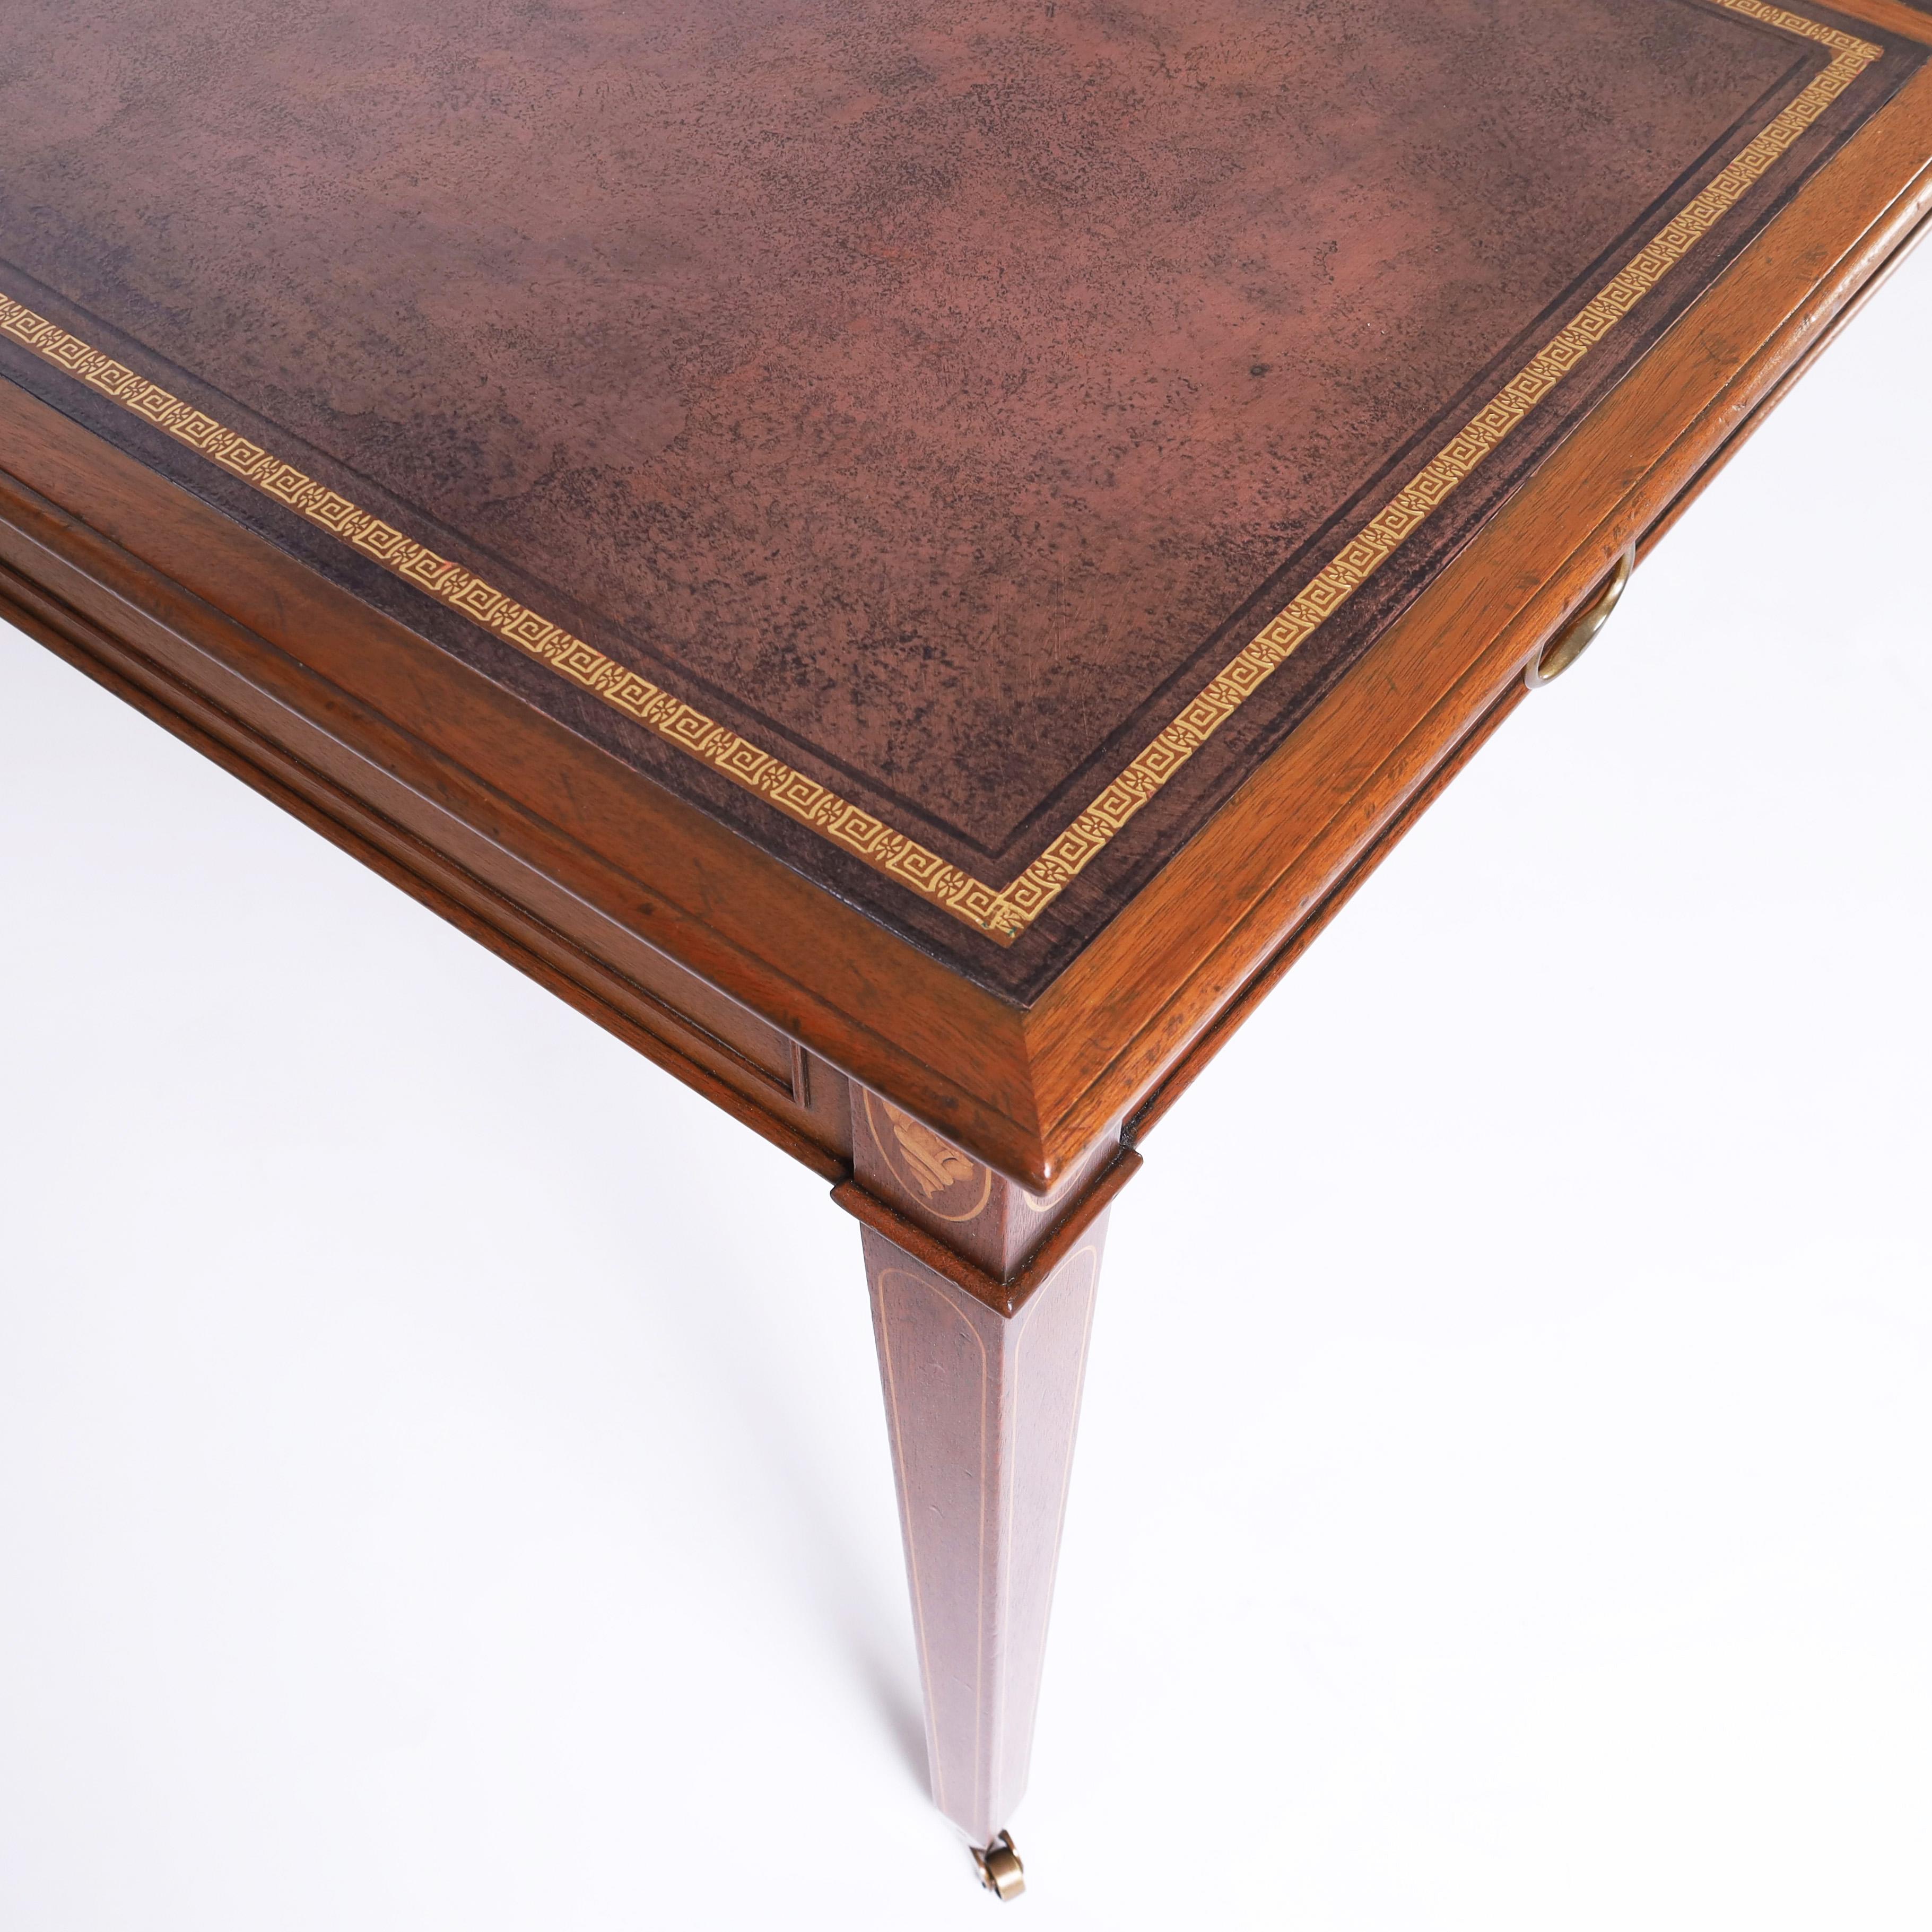 20th Century Kittinger Vintage Leather Top Inlaid Federal Style Desk For Sale